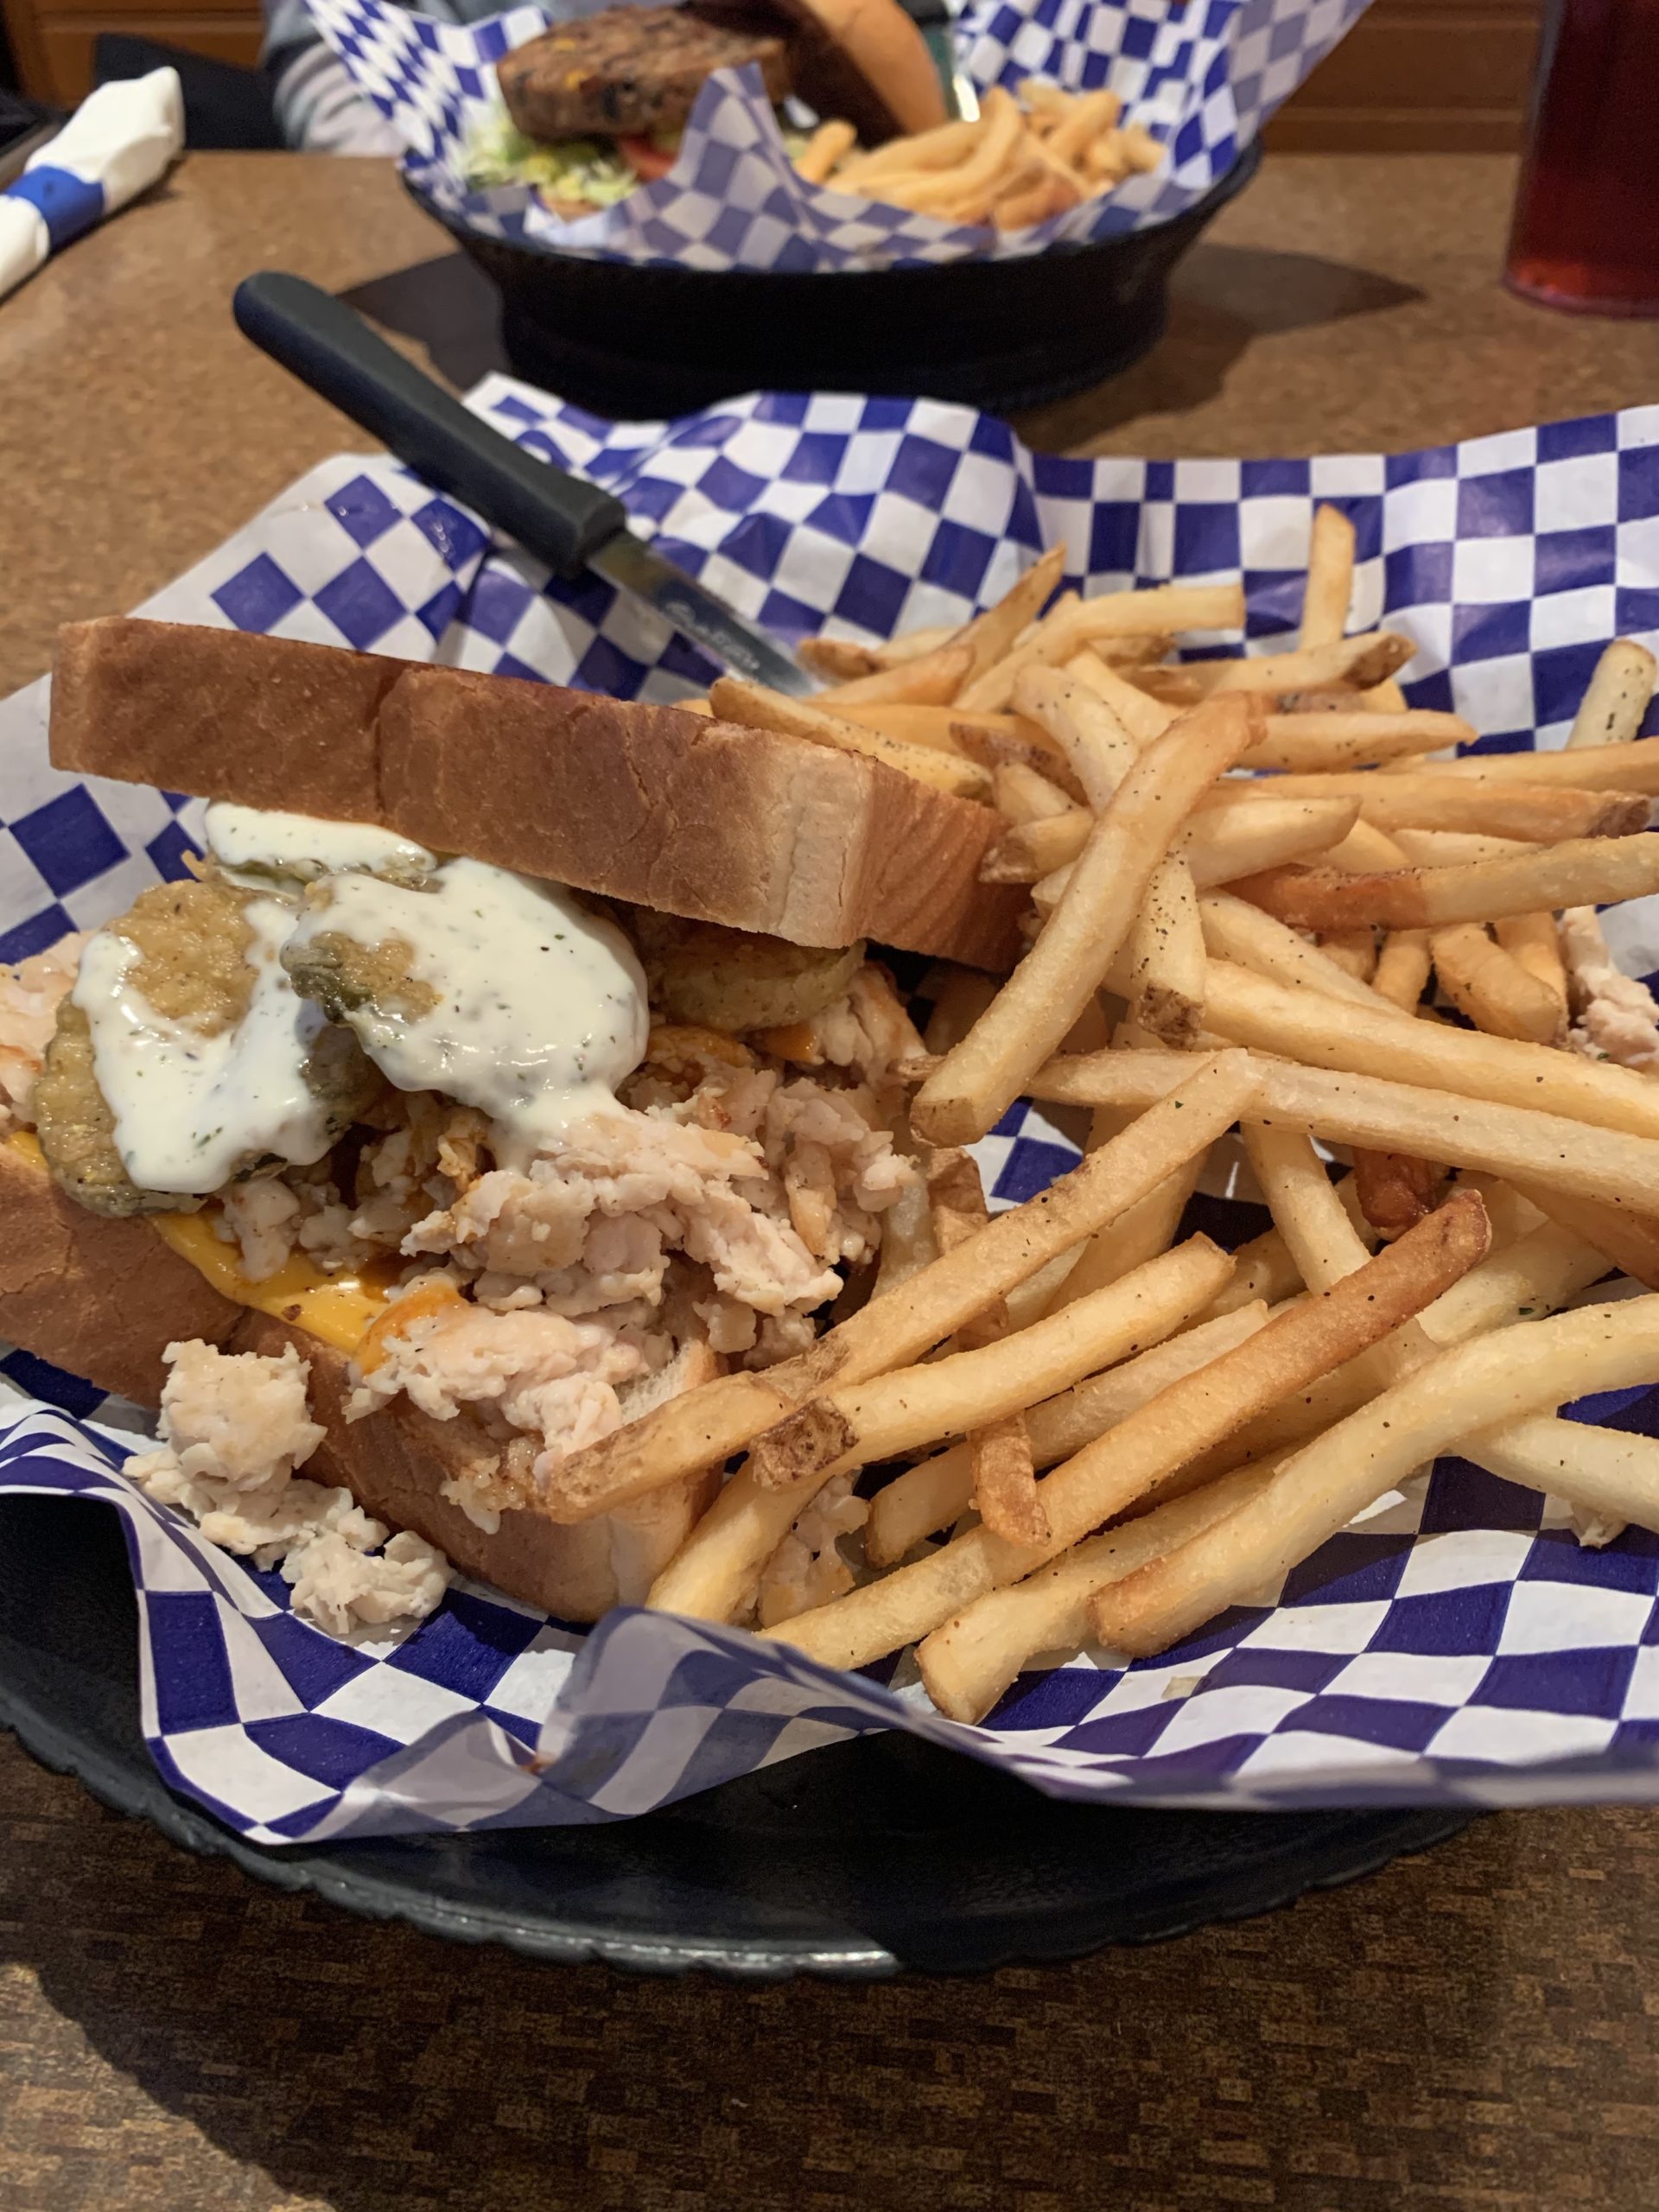 Blue Moose - Pigeon Forge Restaurant Review :: Visit Pigeon Forge